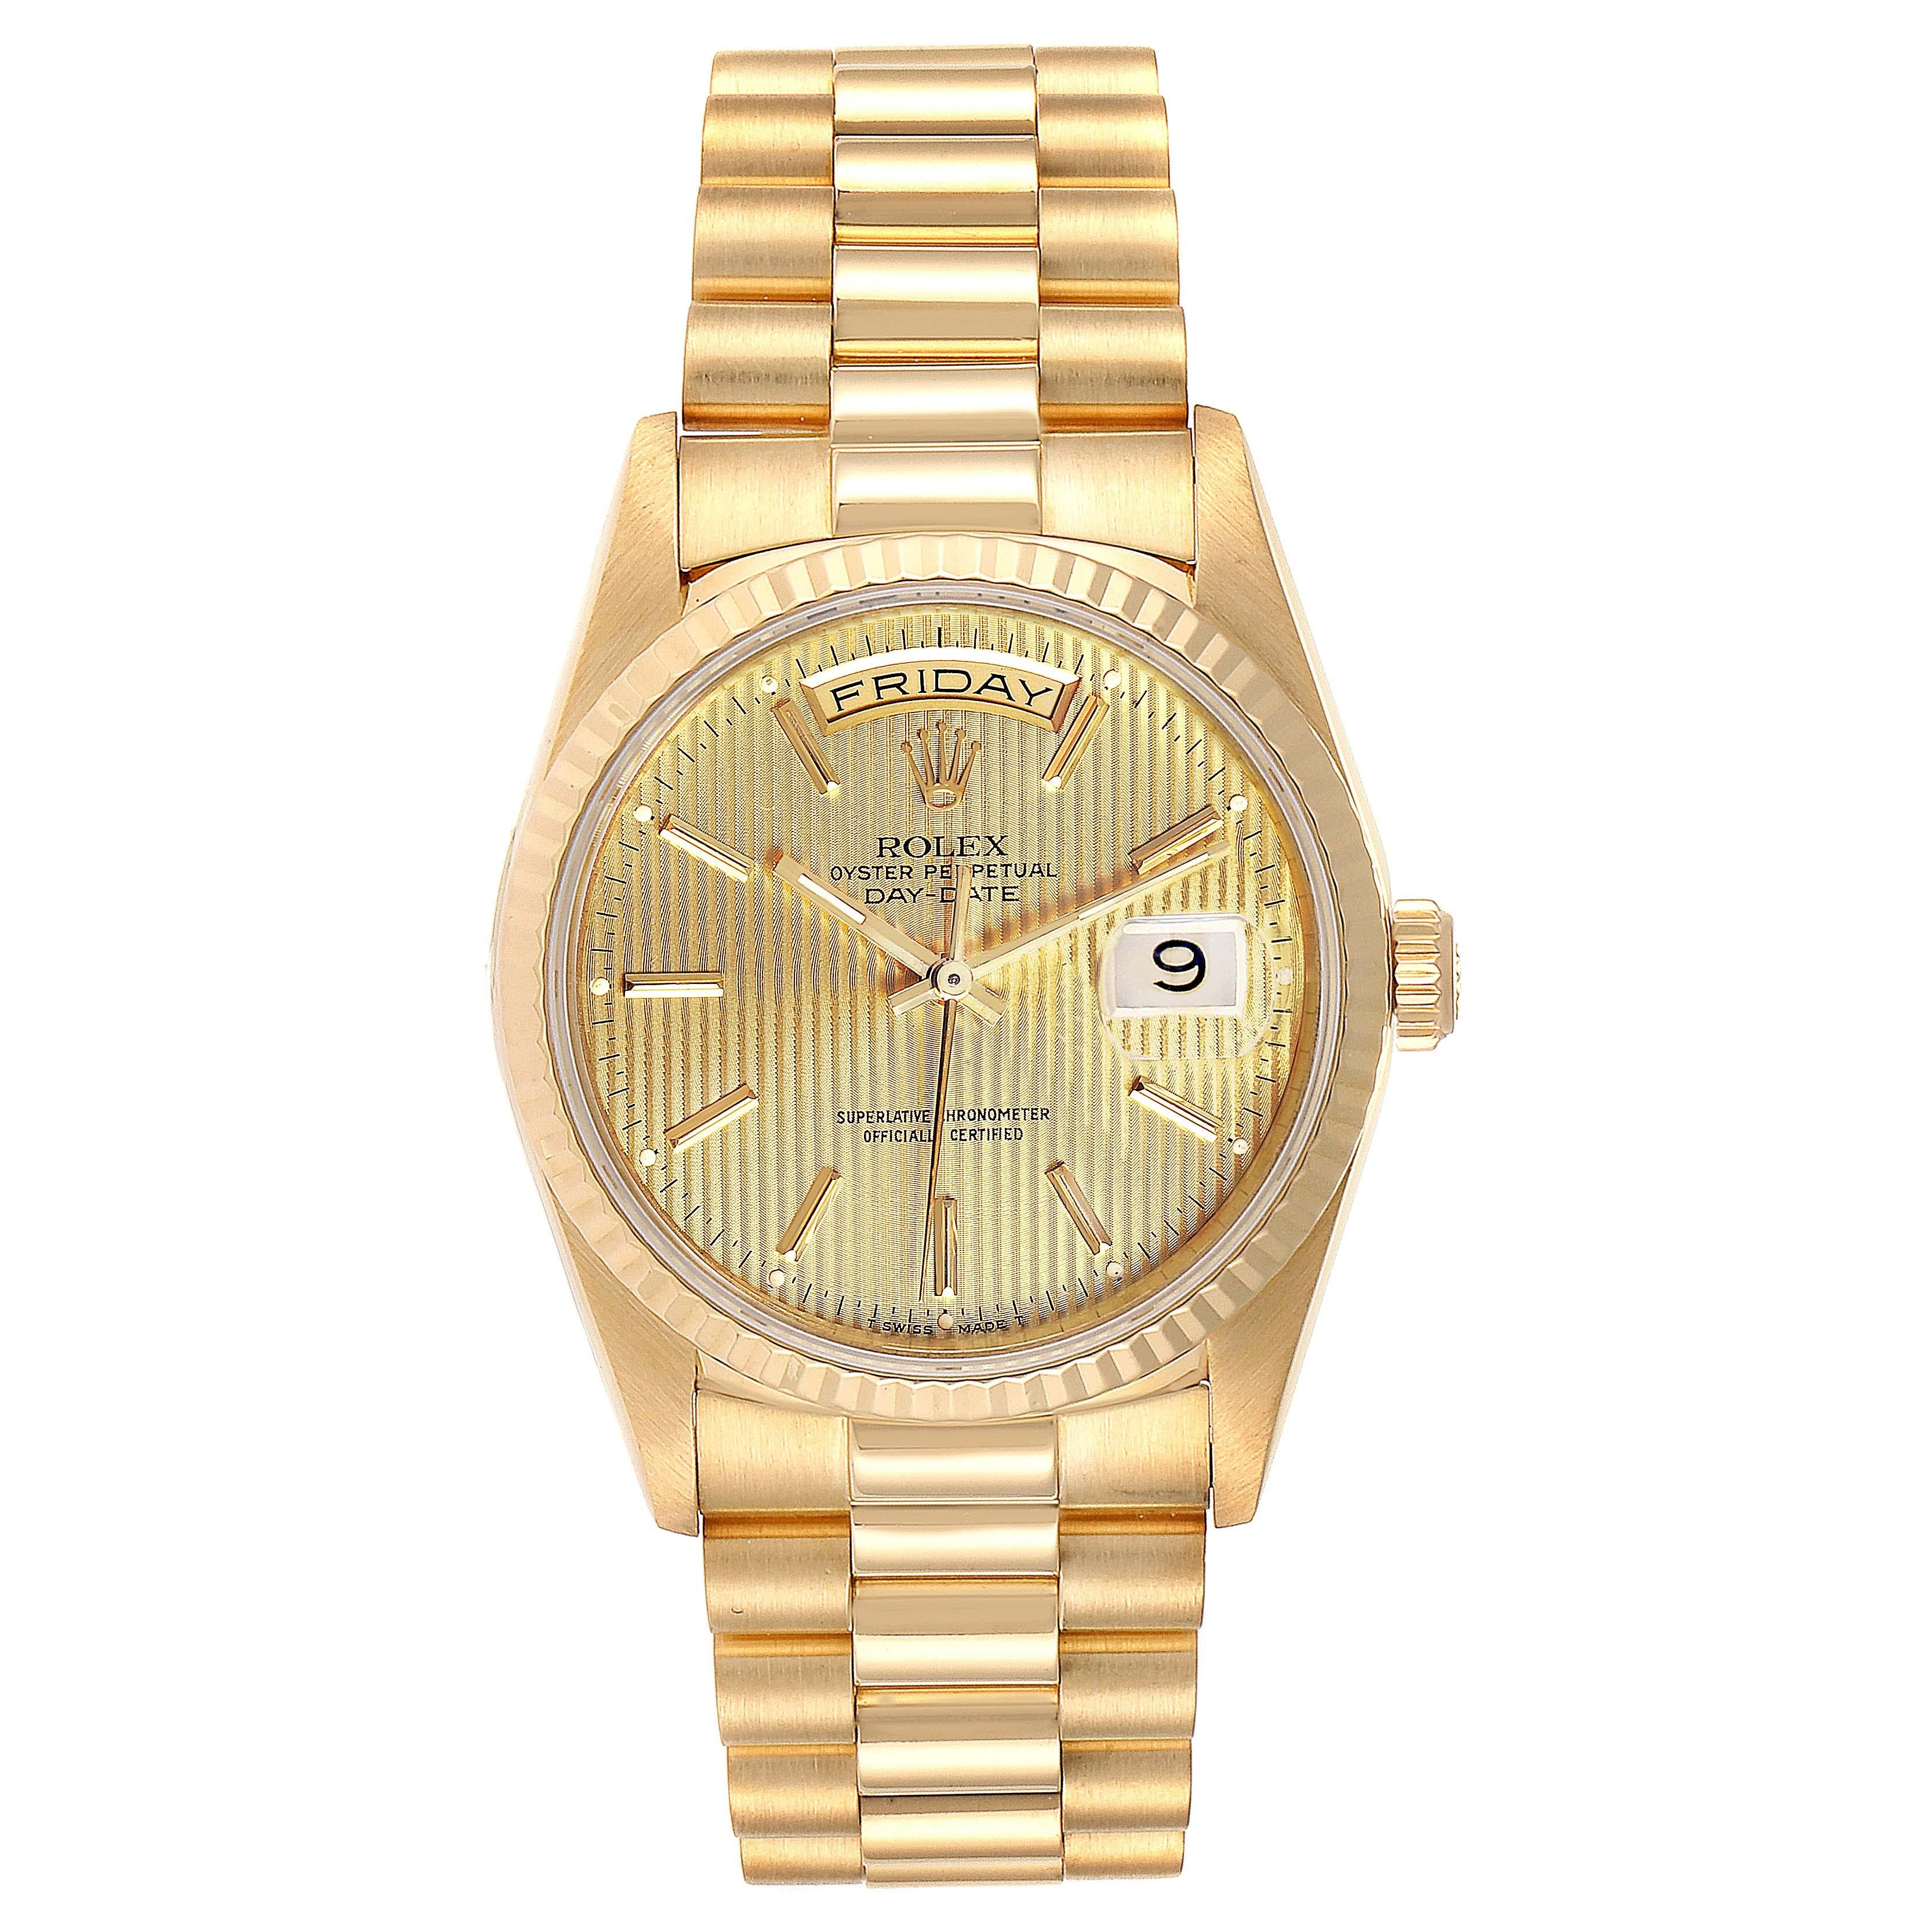 Rolex President Day-Date Yellow Gold Tapestry Dial Mens Watch 18238. Officially certified chronometer self-winding movement. 18k yellow gold oyster case 36.0 mm in diameter. Rolex logo on a crown. 18K yellow gold fluted bezel. Scratch resistant